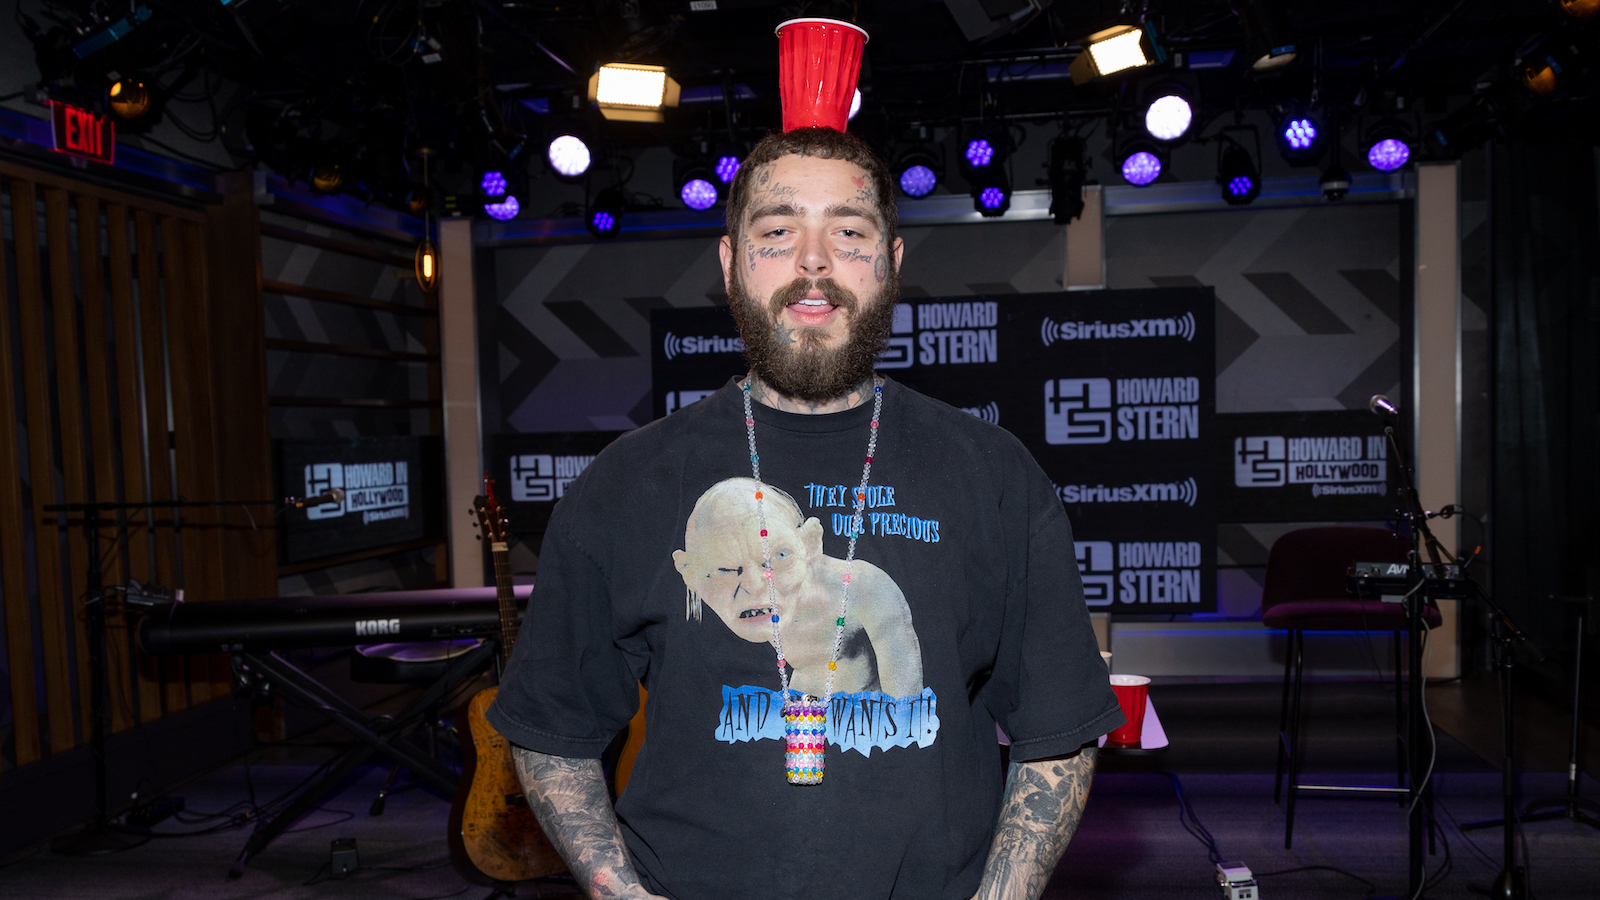 Post Malone Visits SiriusXM's "The Howard Stern Show"